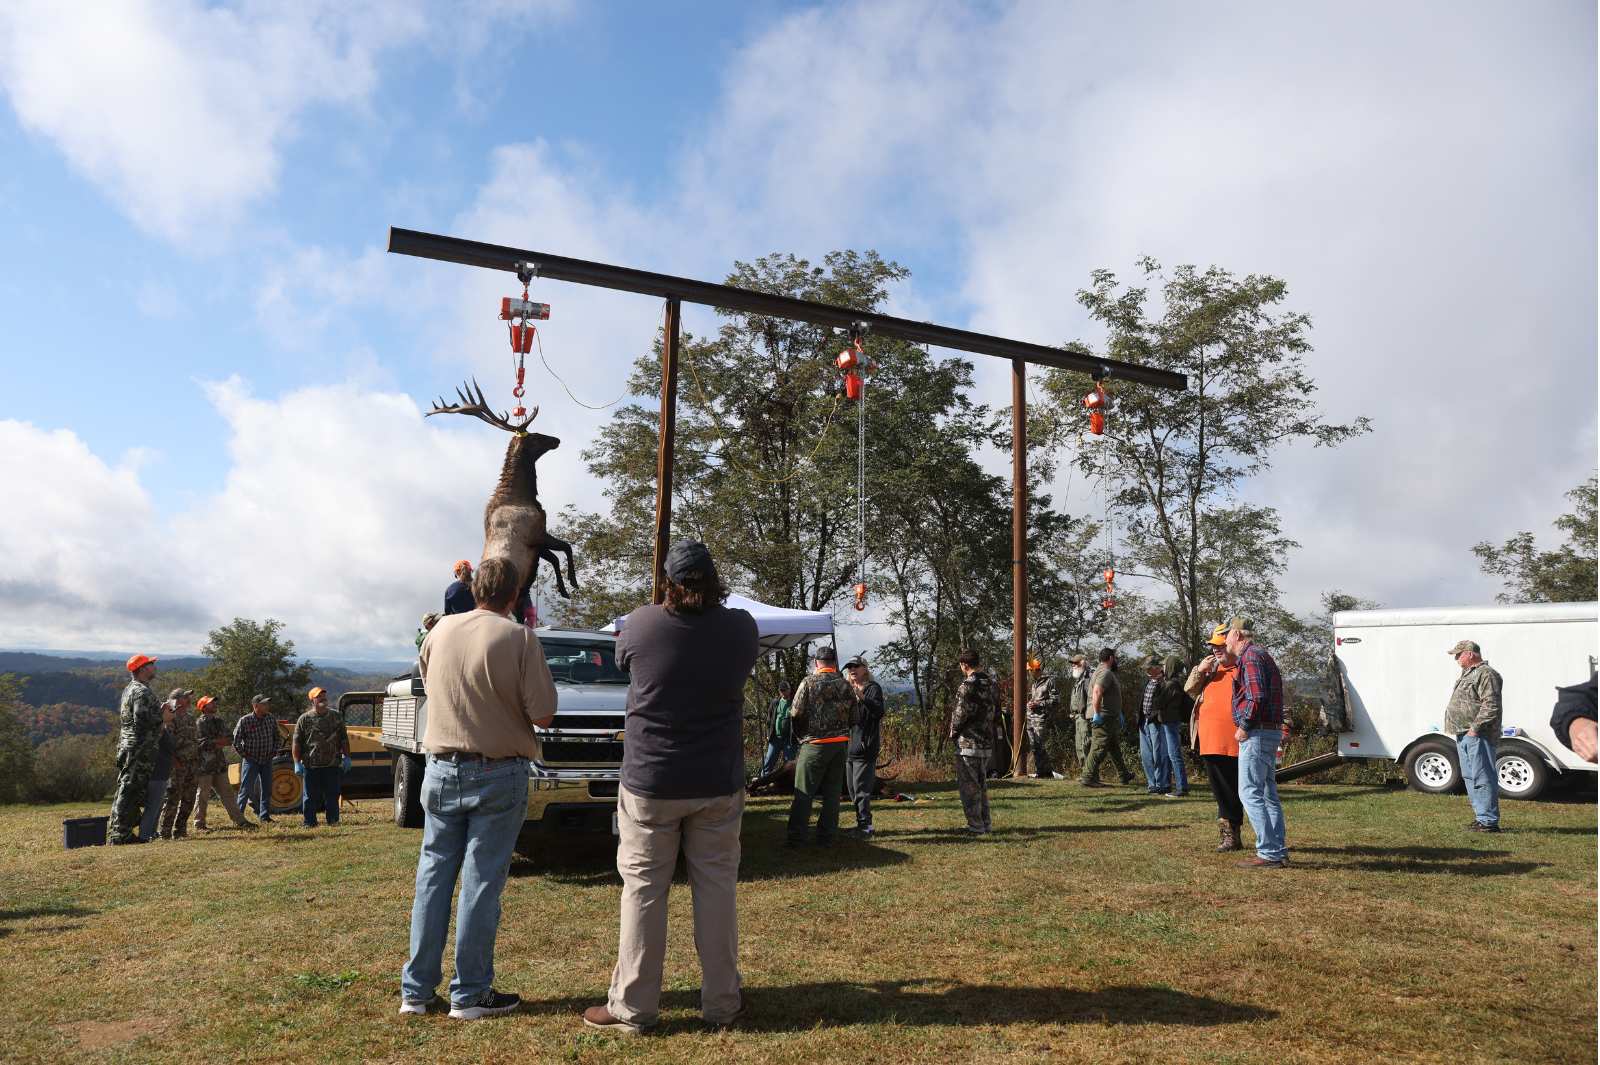 A group of people look on as a massive bull elk is suspended from a weighing device.